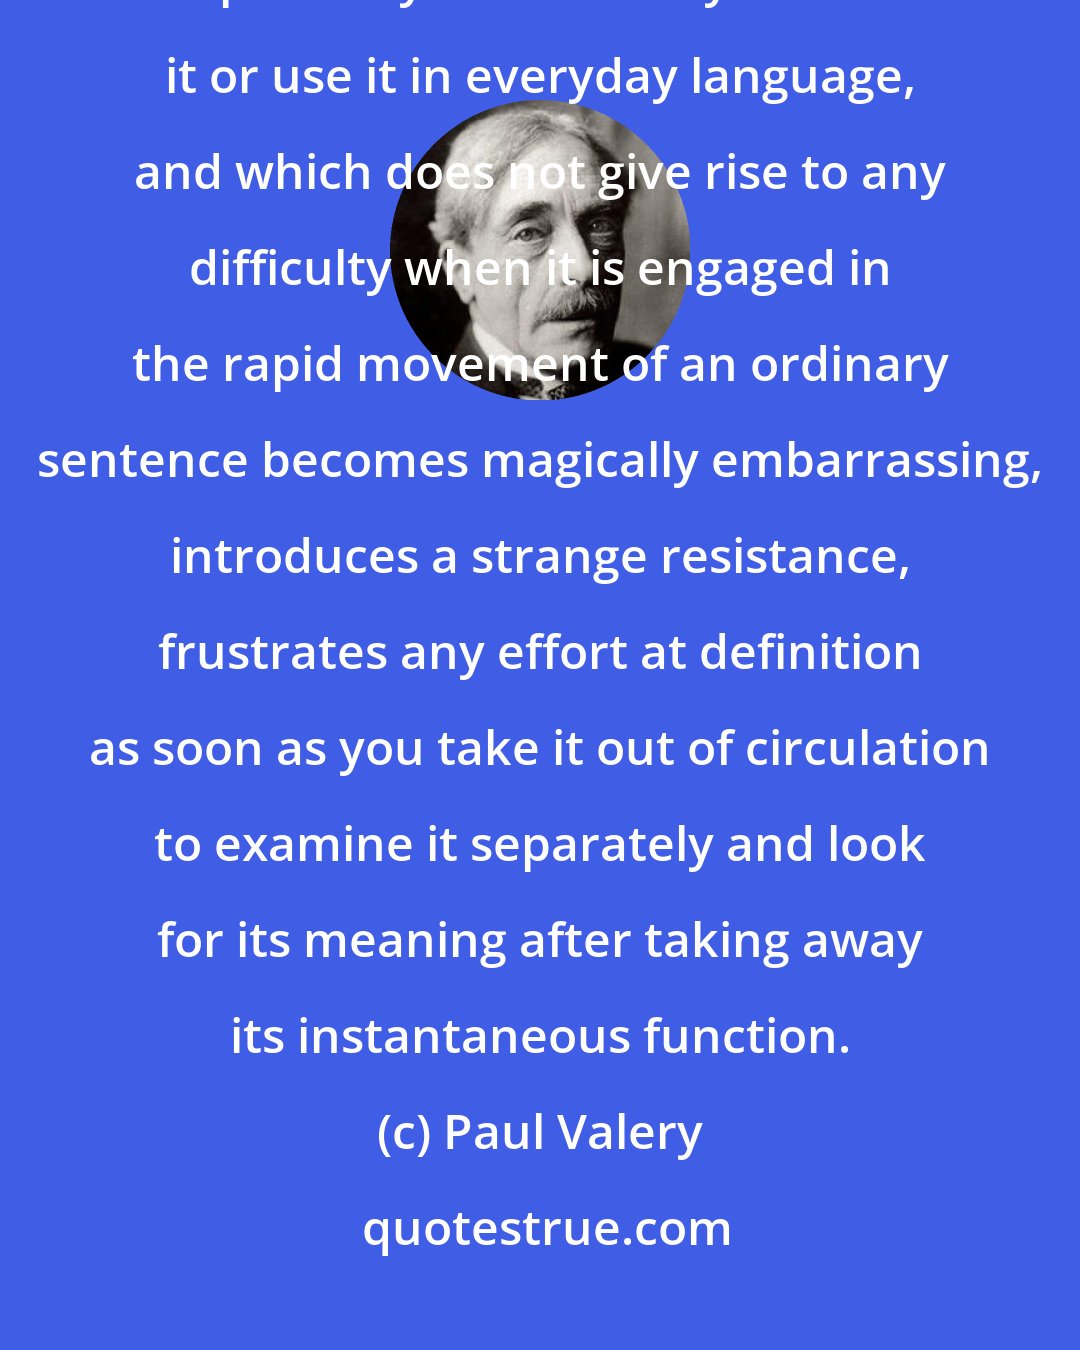 Paul Valery: You have certainly observed the curious fact that a given word which is perfectly clear when you hear it or use it in everyday language, and which does not give rise to any difficulty when it is engaged in the rapid movement of an ordinary sentence becomes magically embarrassing, introduces a strange resistance, frustrates any effort at definition as soon as you take it out of circulation to examine it separately and look for its meaning after taking away its instantaneous function.